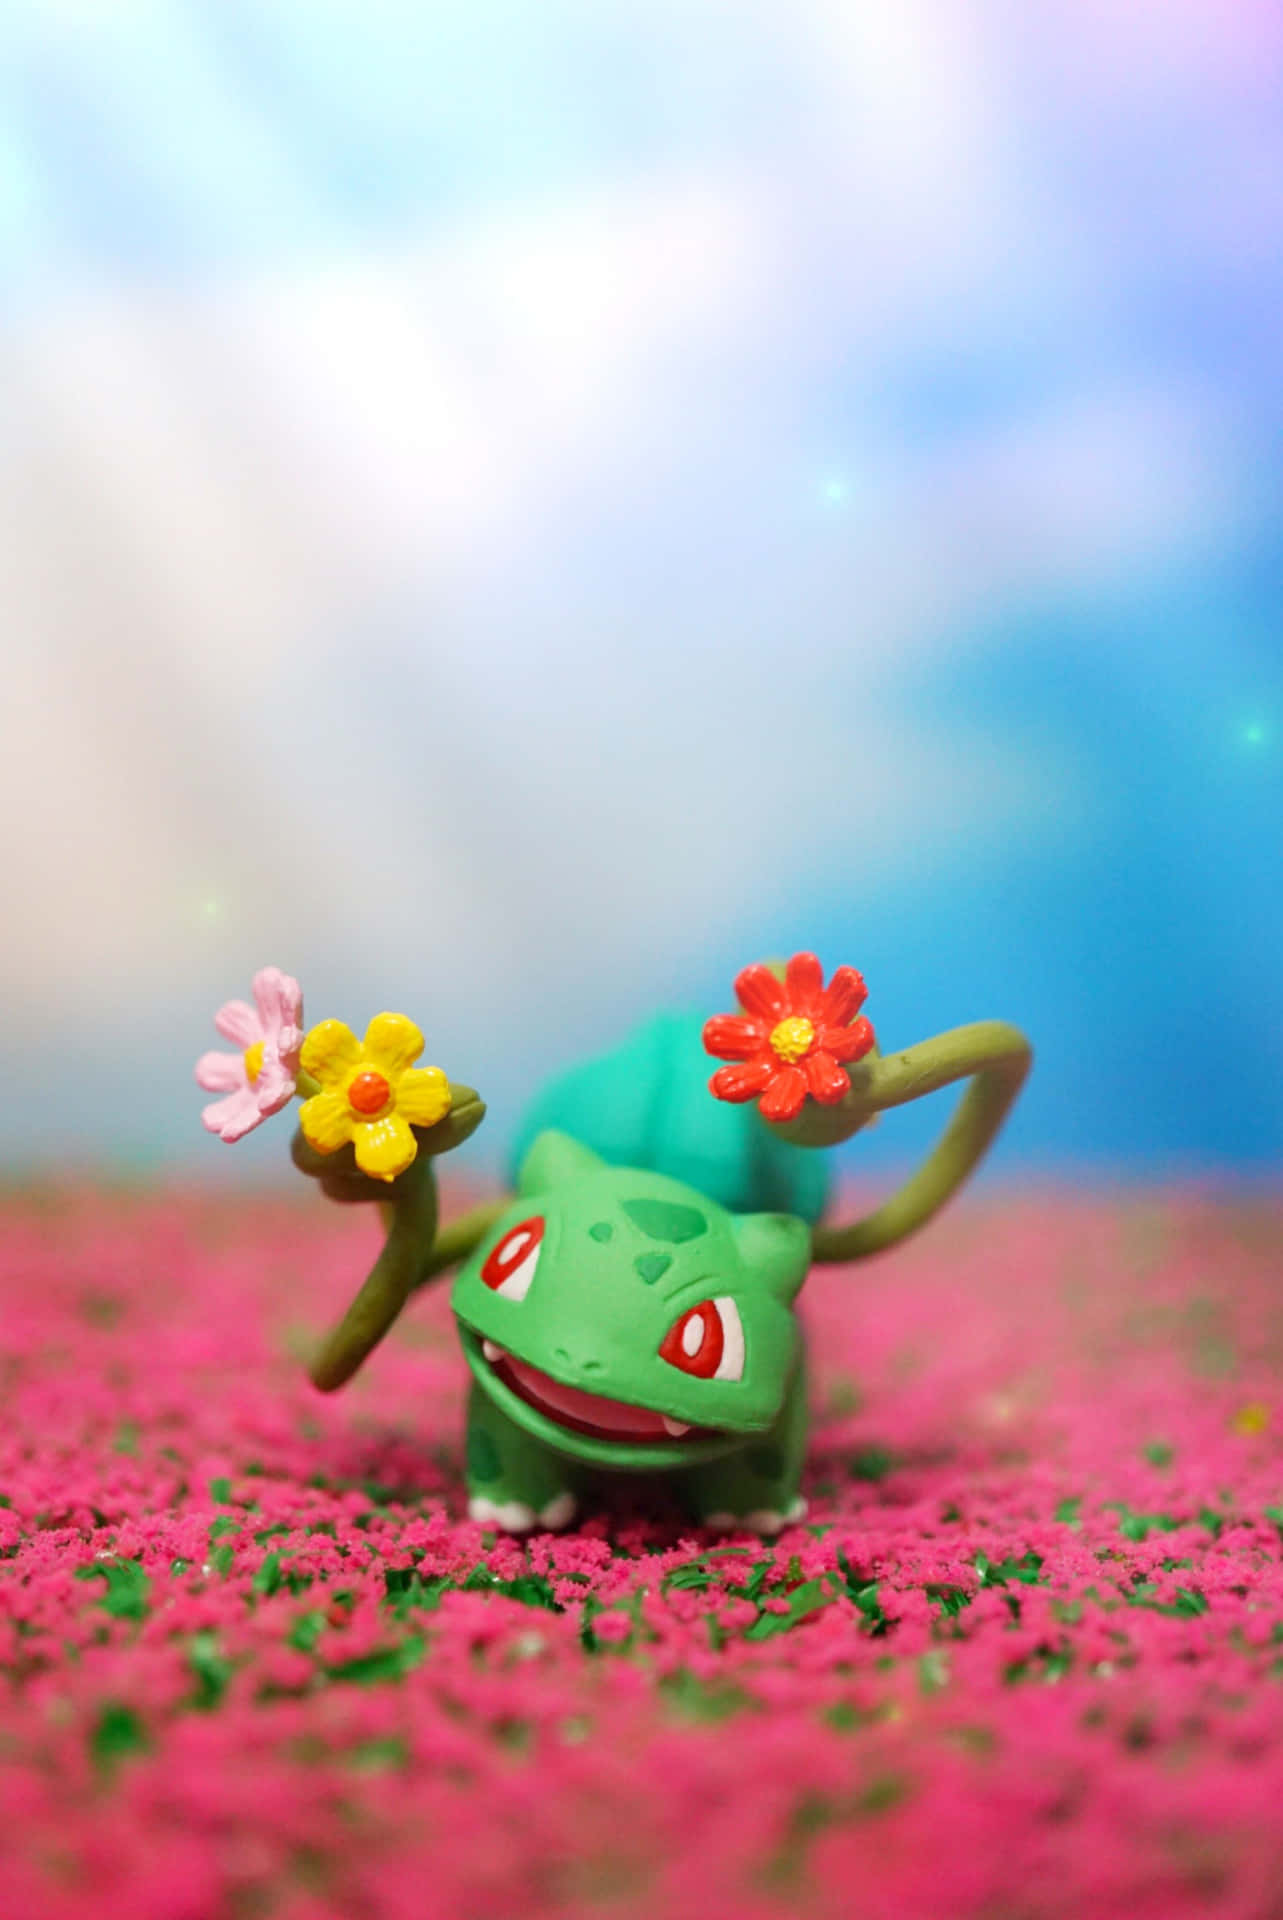 Collection of Colorful Pokemon Figures Wallpaper